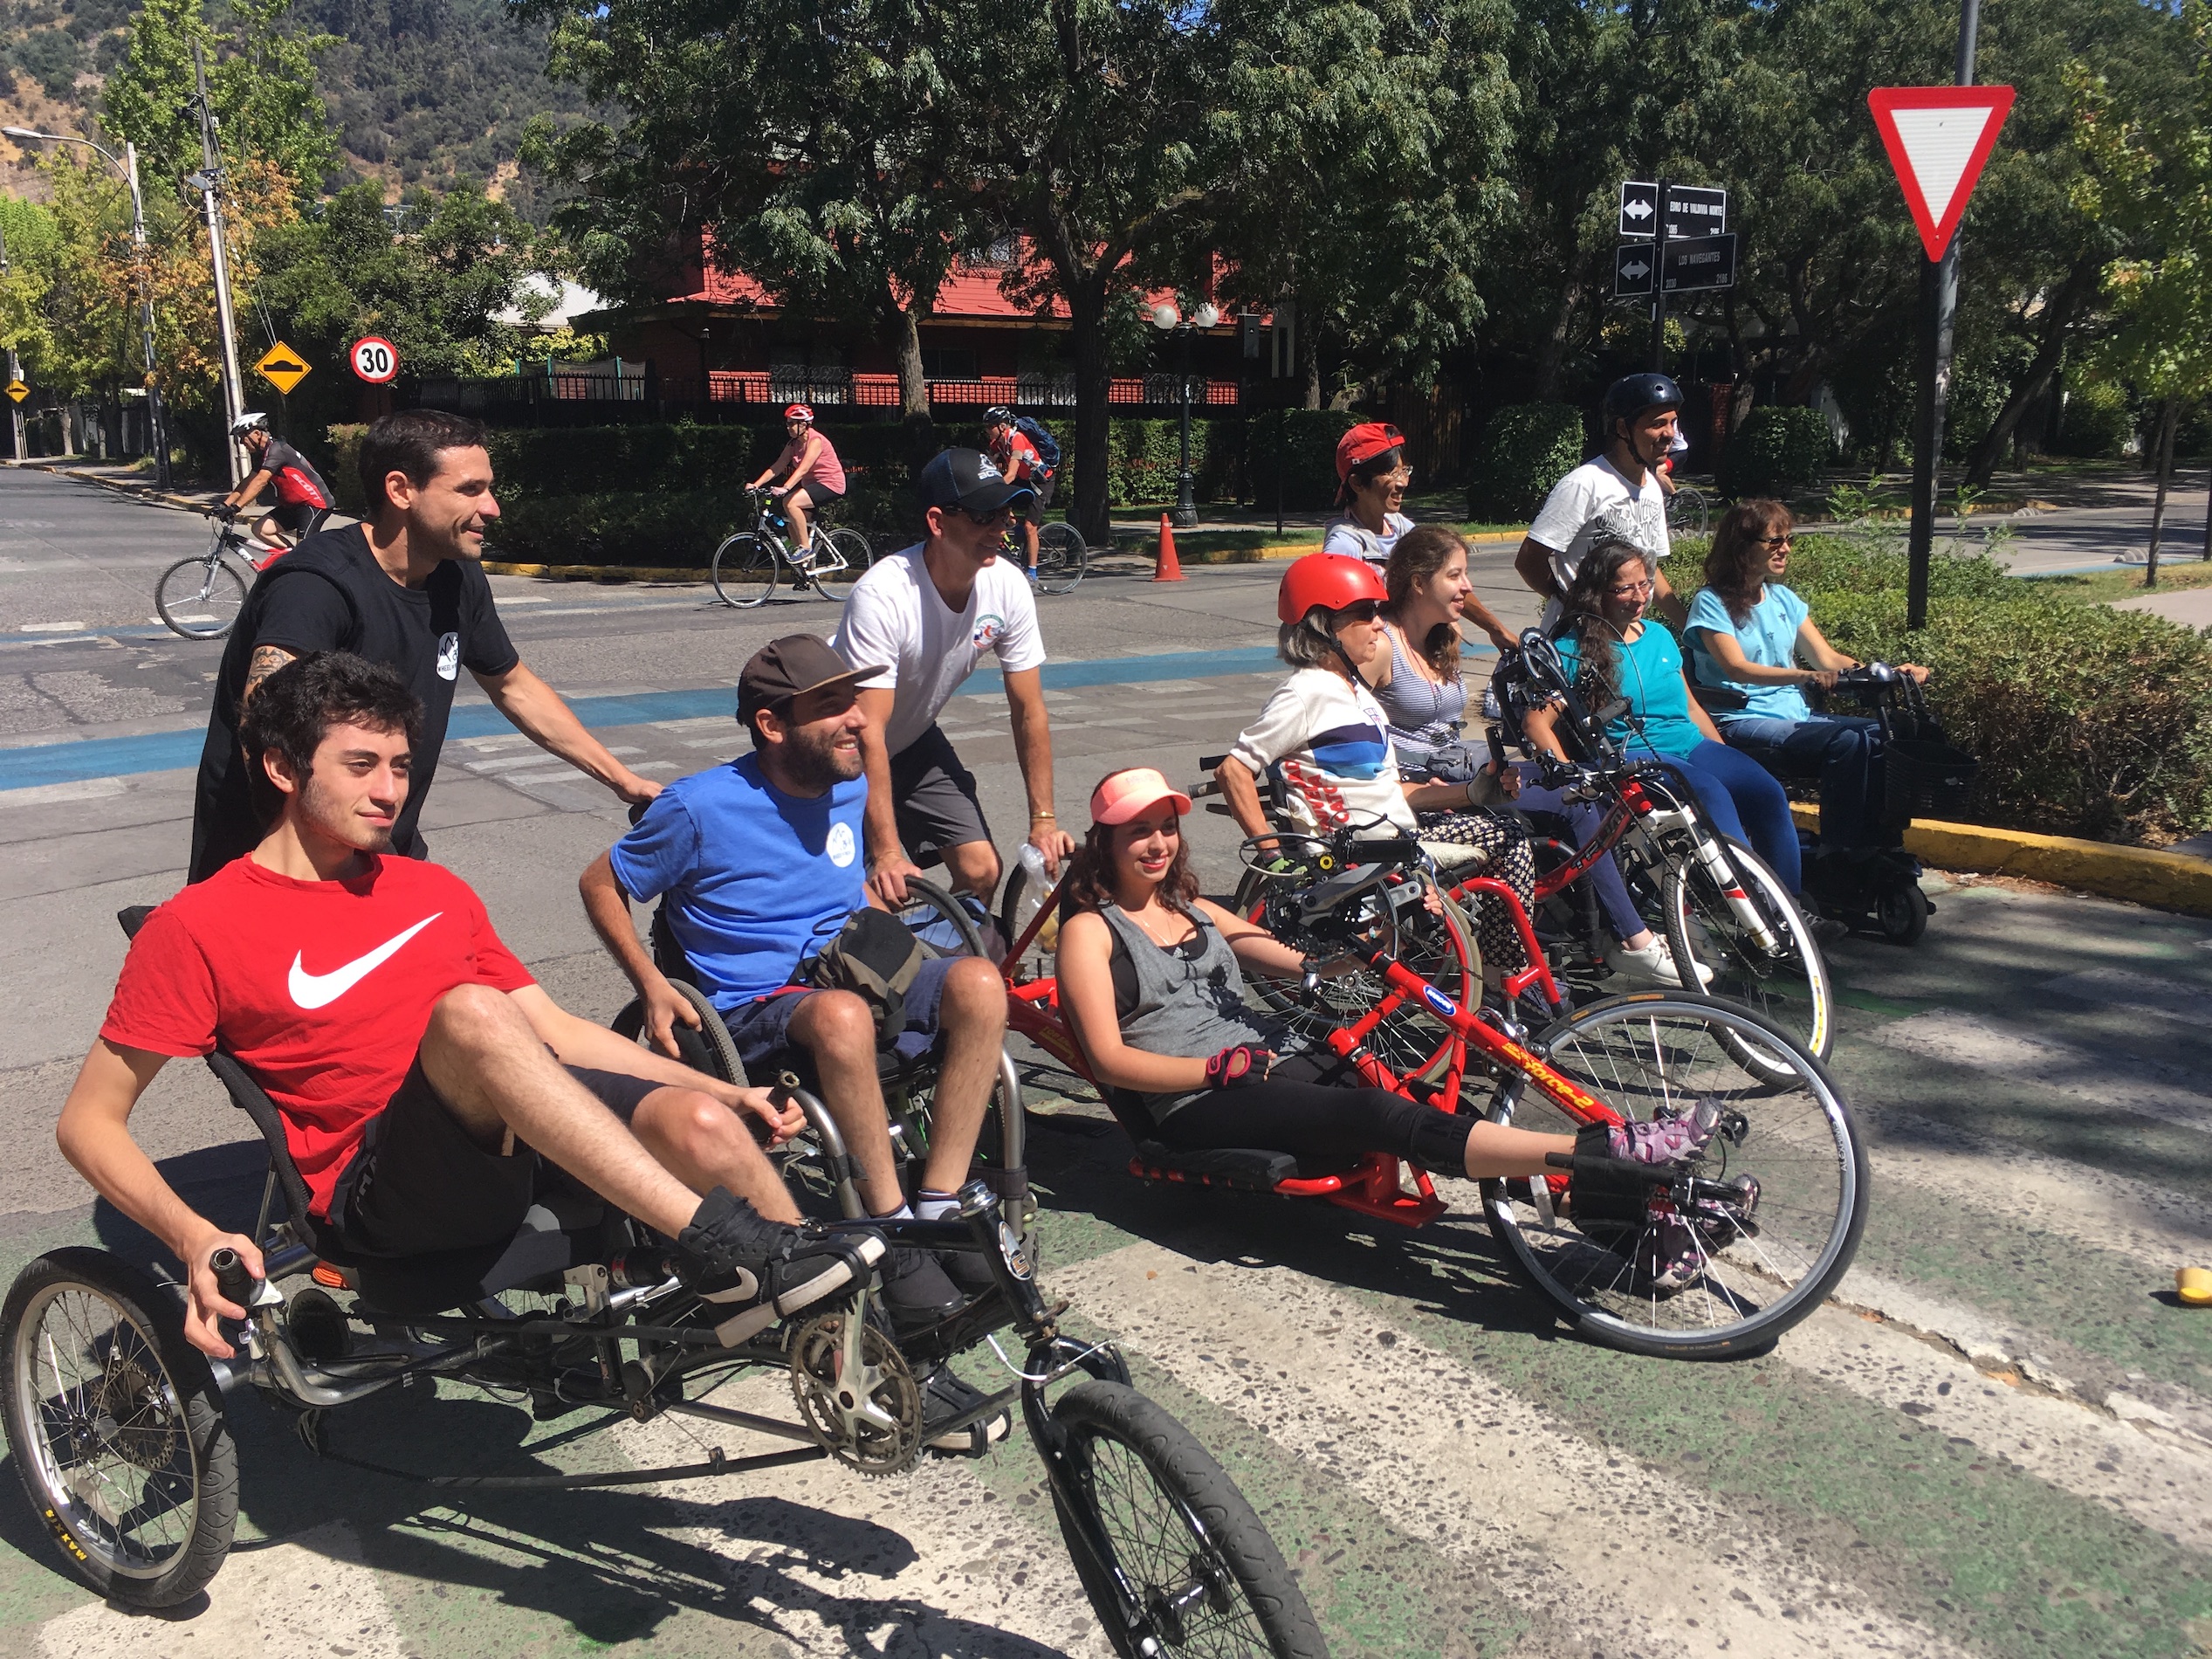 A group of people on adaptive bikes on a street.